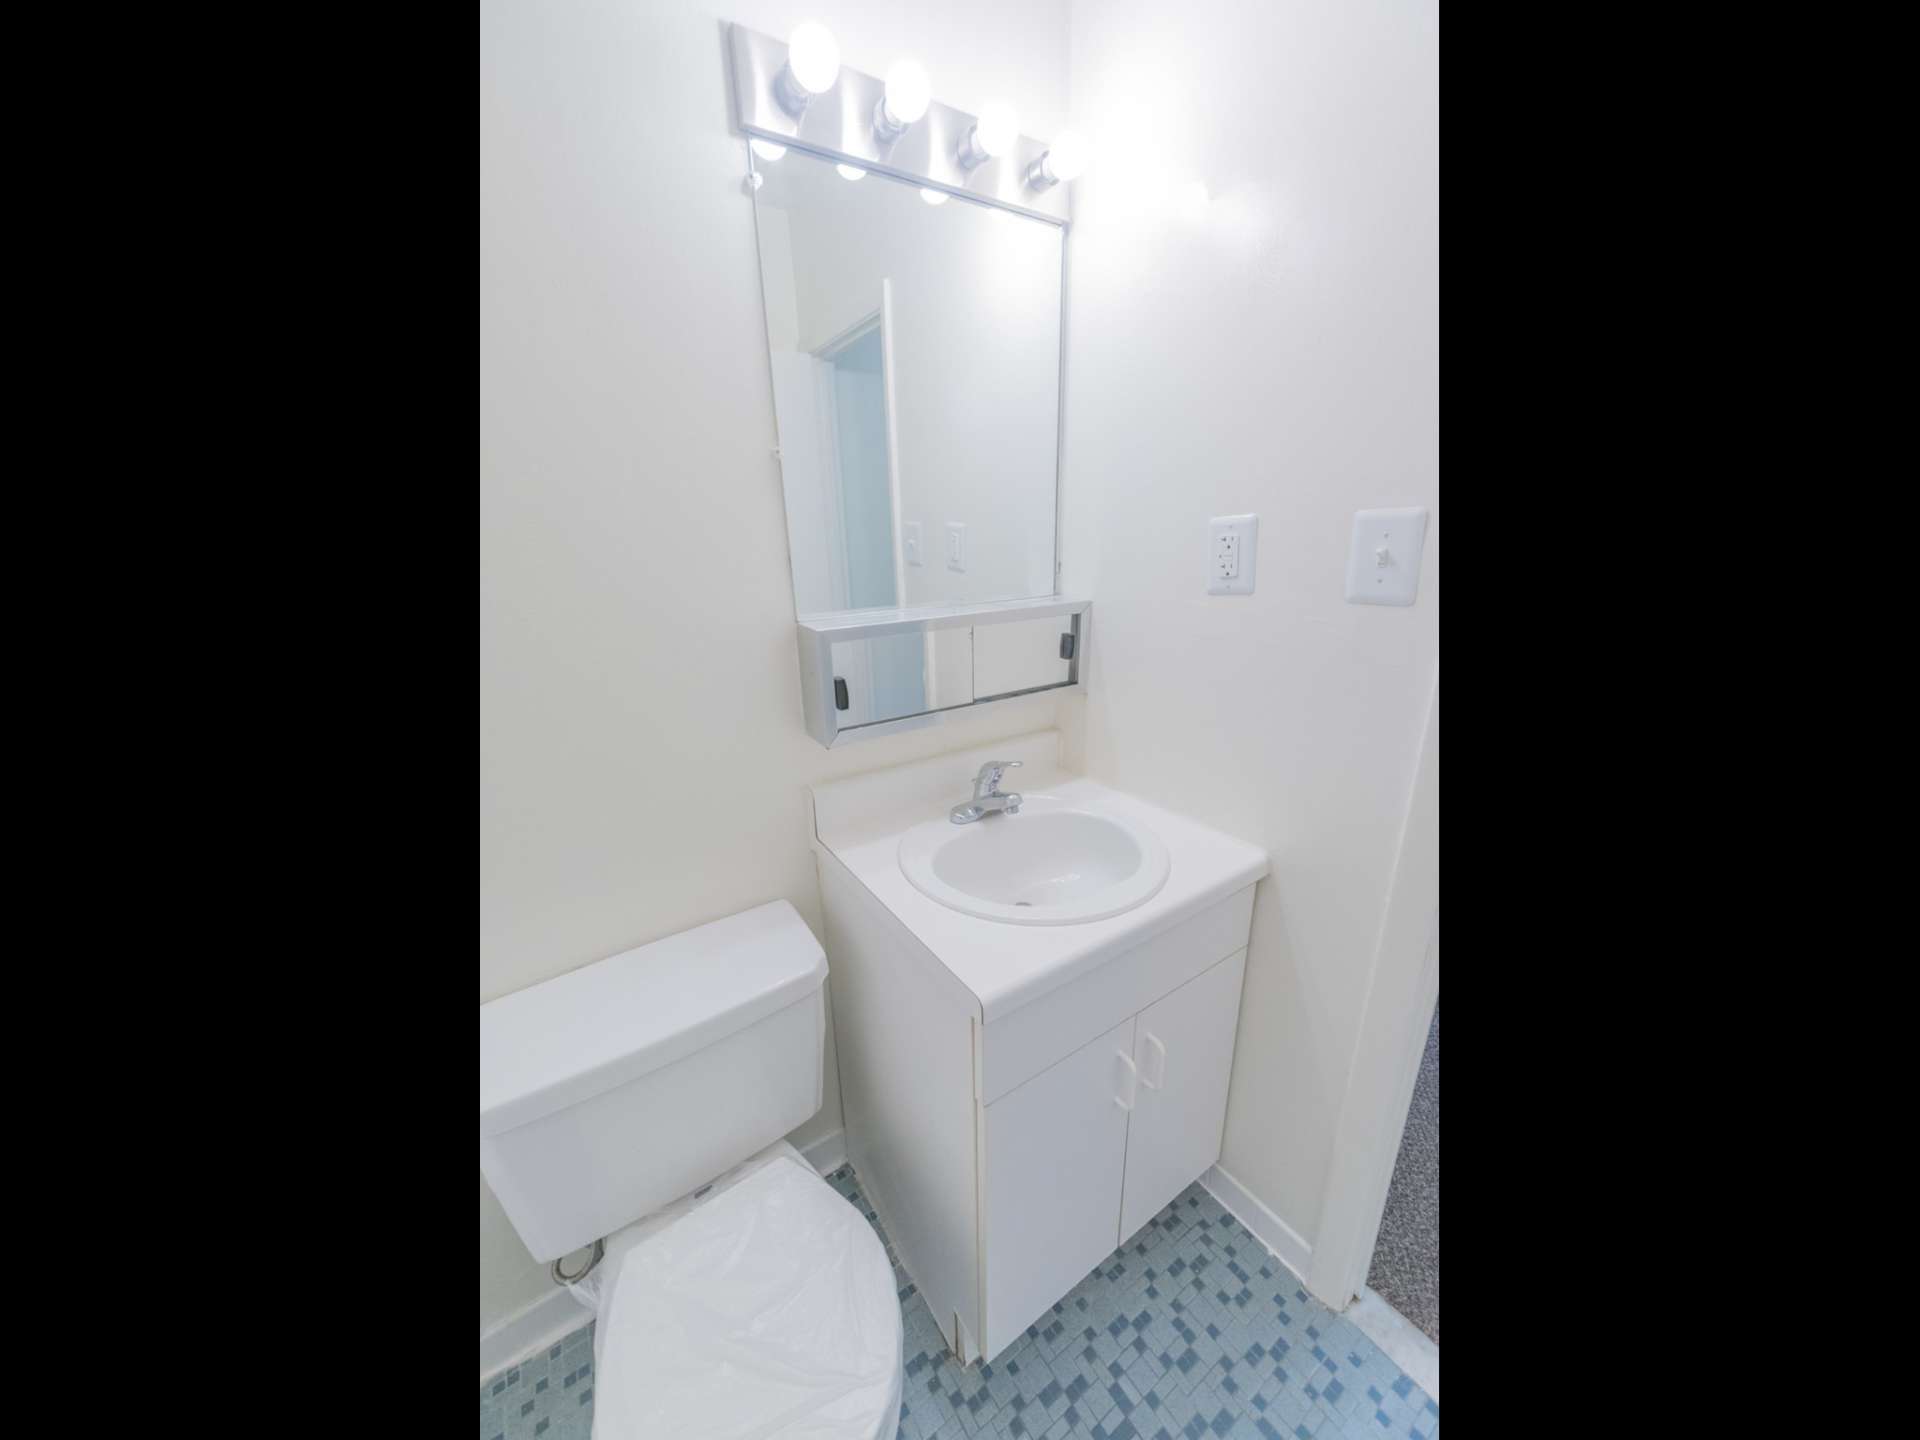 Bathroom with blue tile flooring, mirror, toilet, and white sink with cabinets.